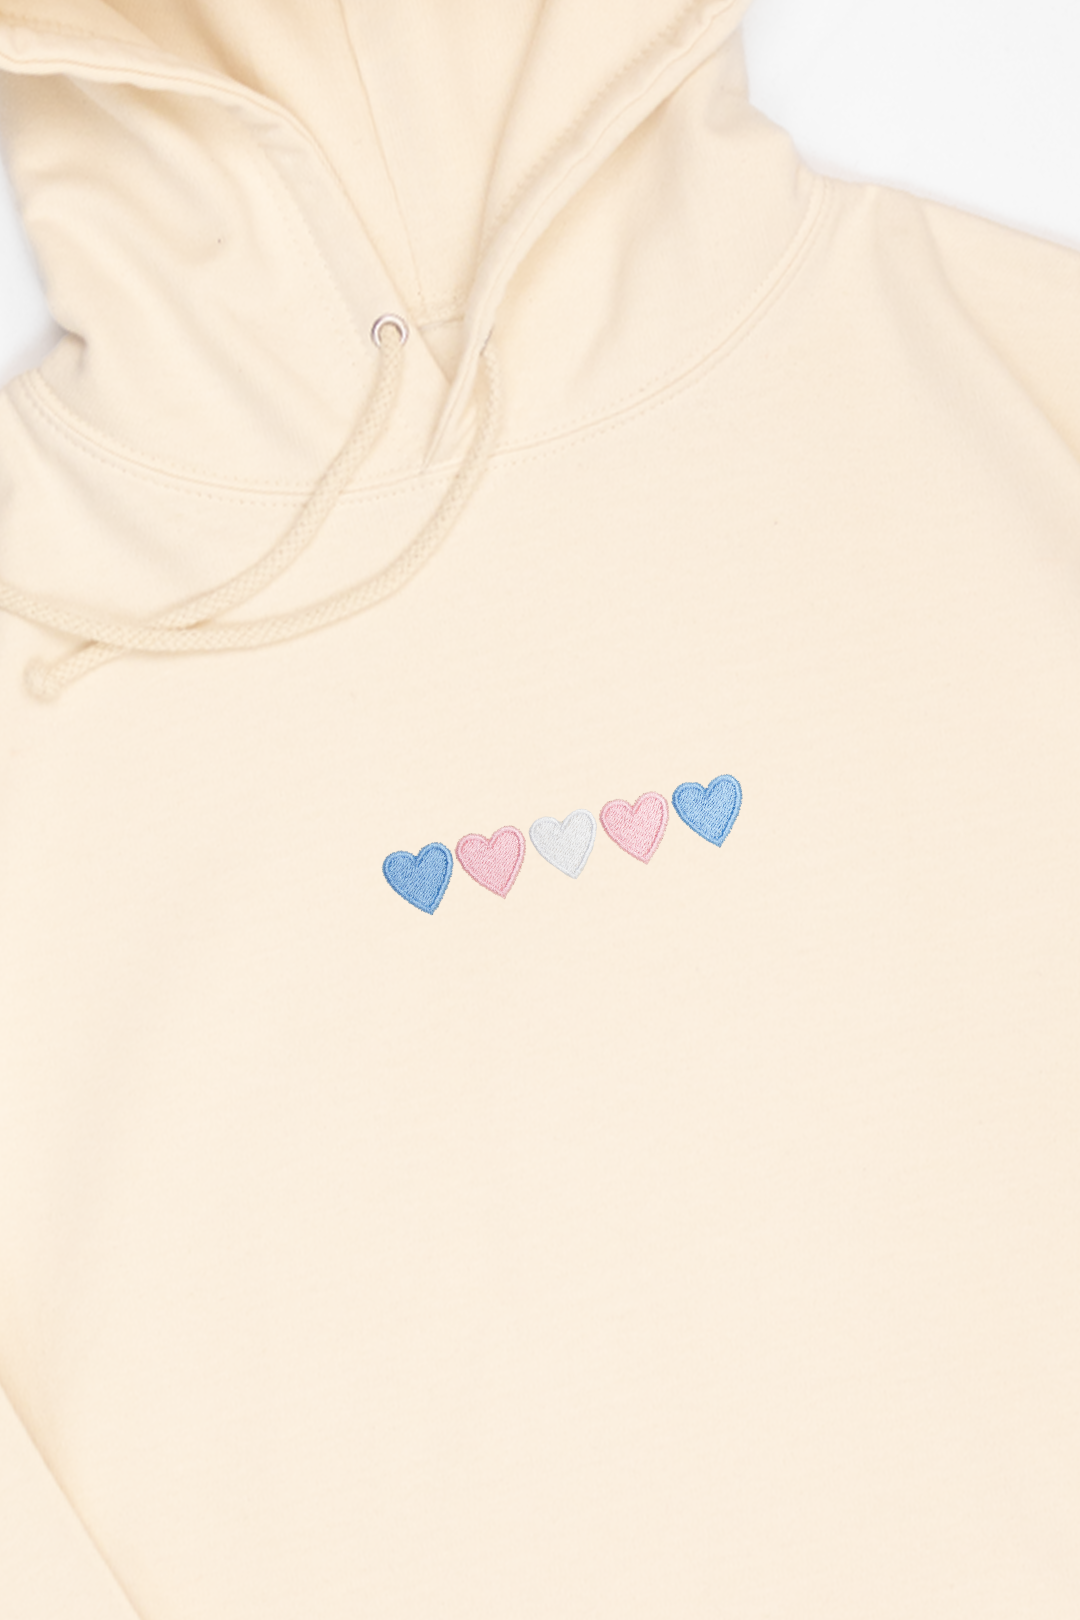 Embroidered Hearts Transgender Hoodie